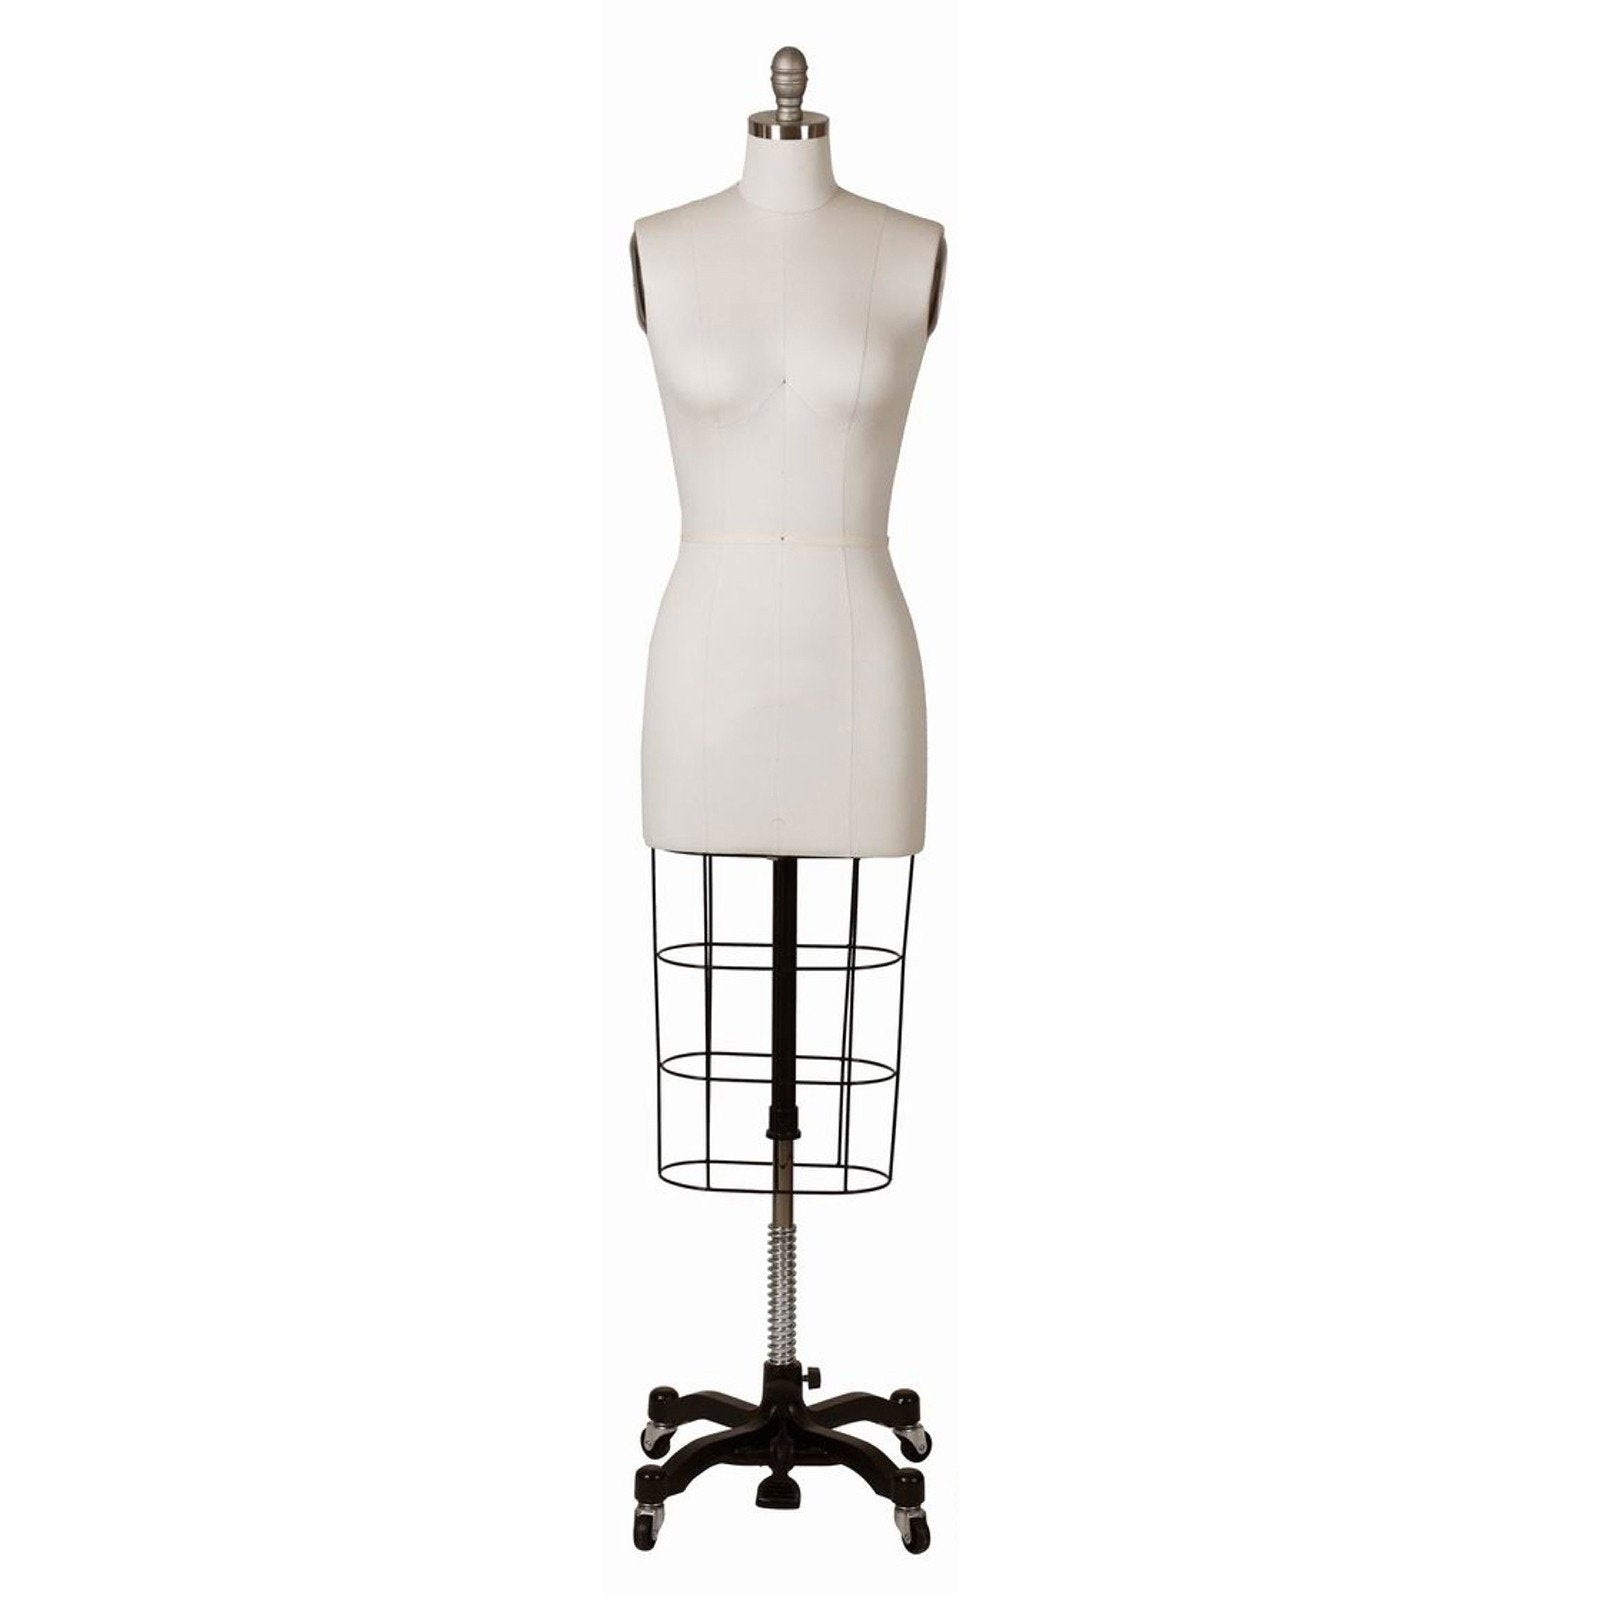 Female Full Body Sewing Dress Form: Size 4 – Mannequin Madness